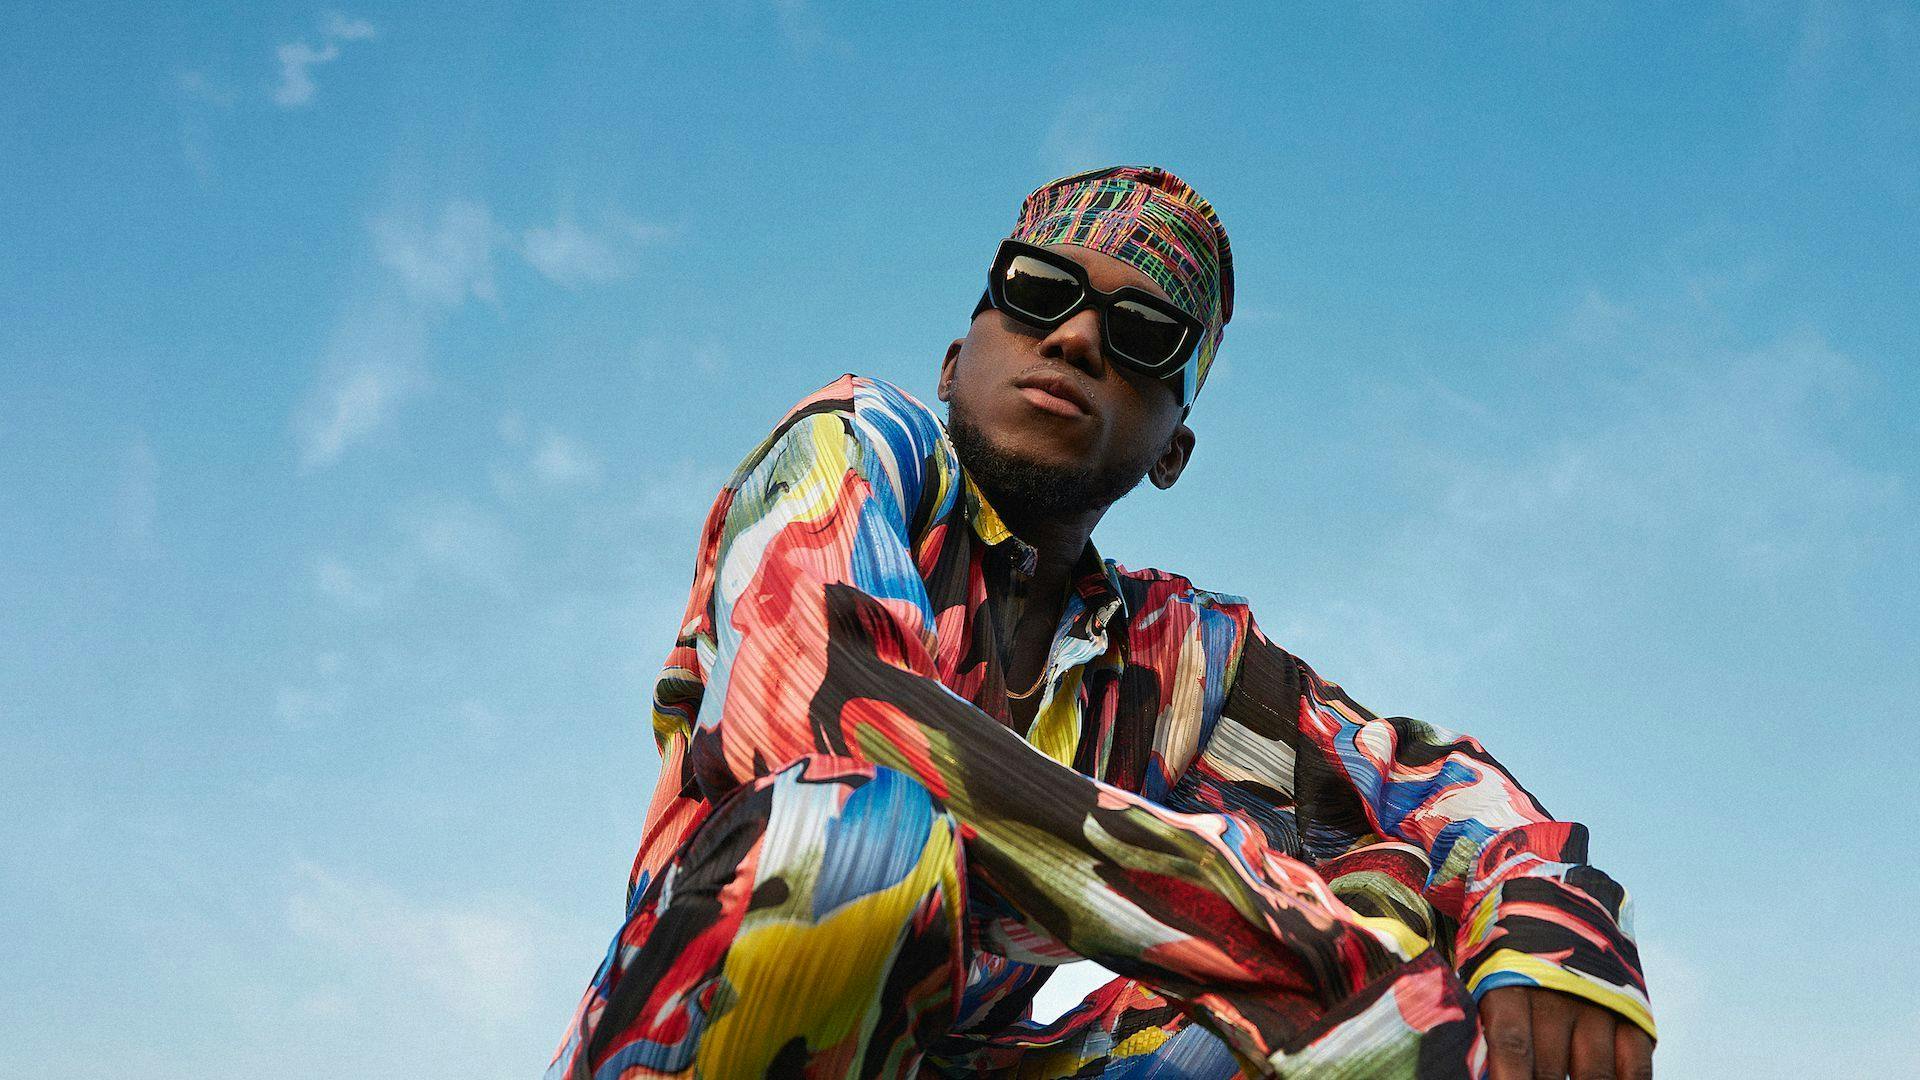 DJ Spinall's Momentous Journey: From Engineer to Afrobeat Stalwart